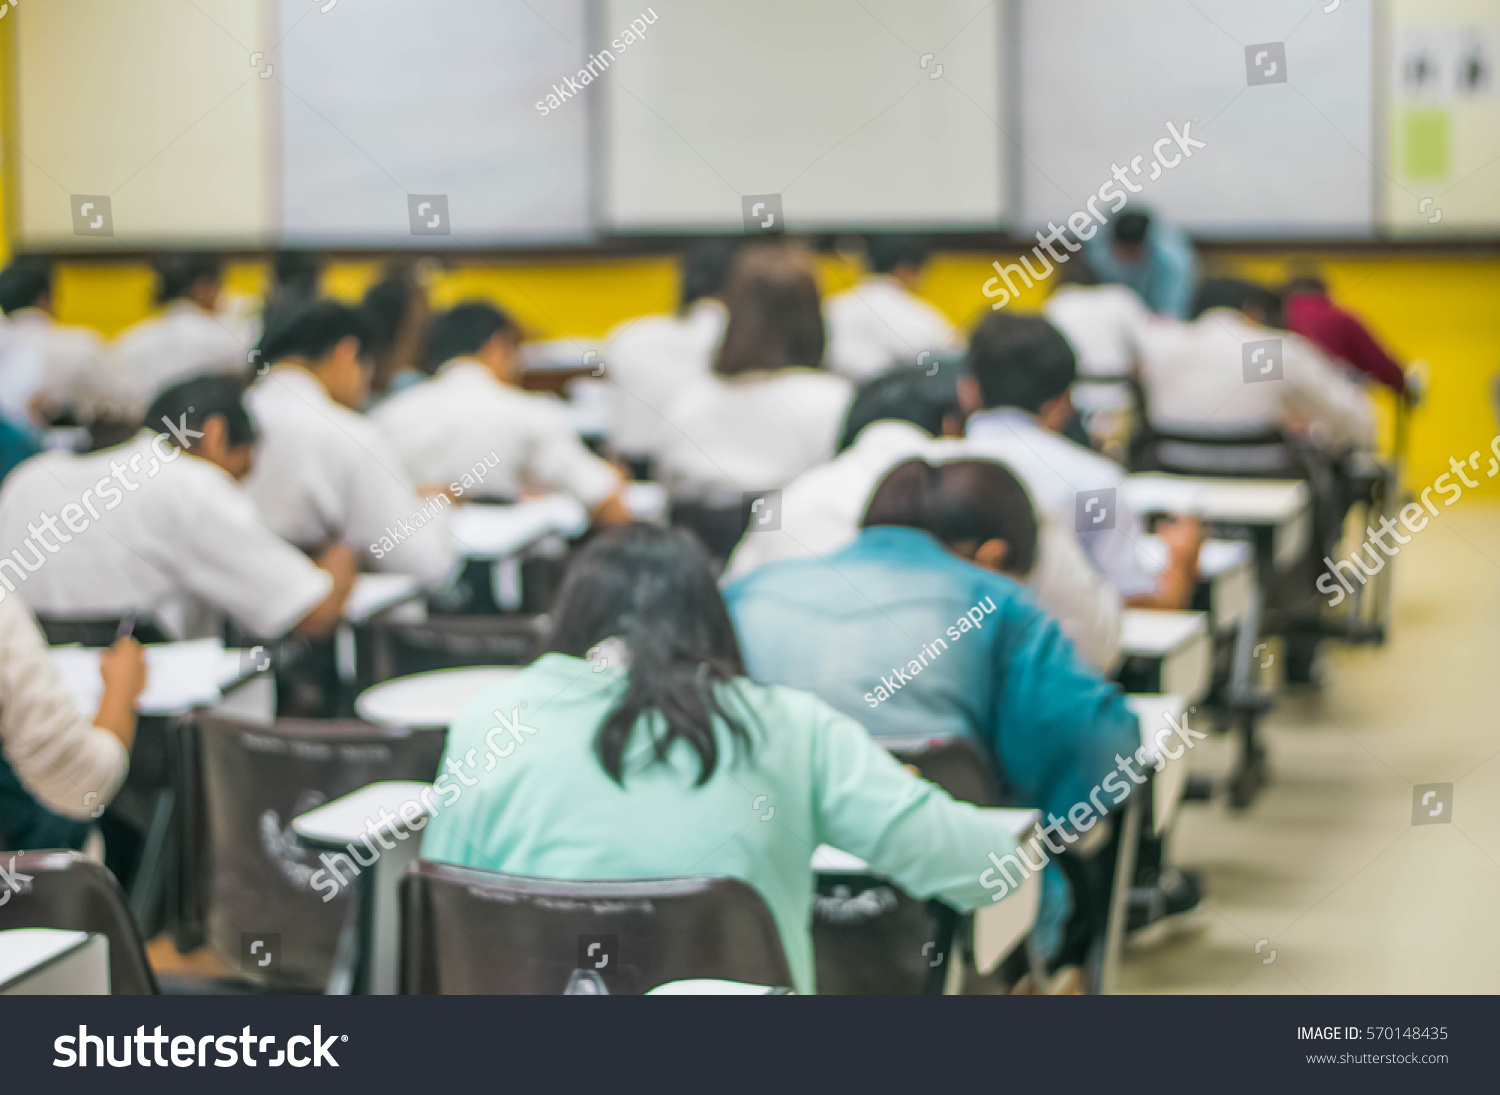 Blur abstract background of examination room with undergraduate students inside. Blurred view of student doing final test in exam hall. Blurry view of study chairs in classroom of university or campus #570148435